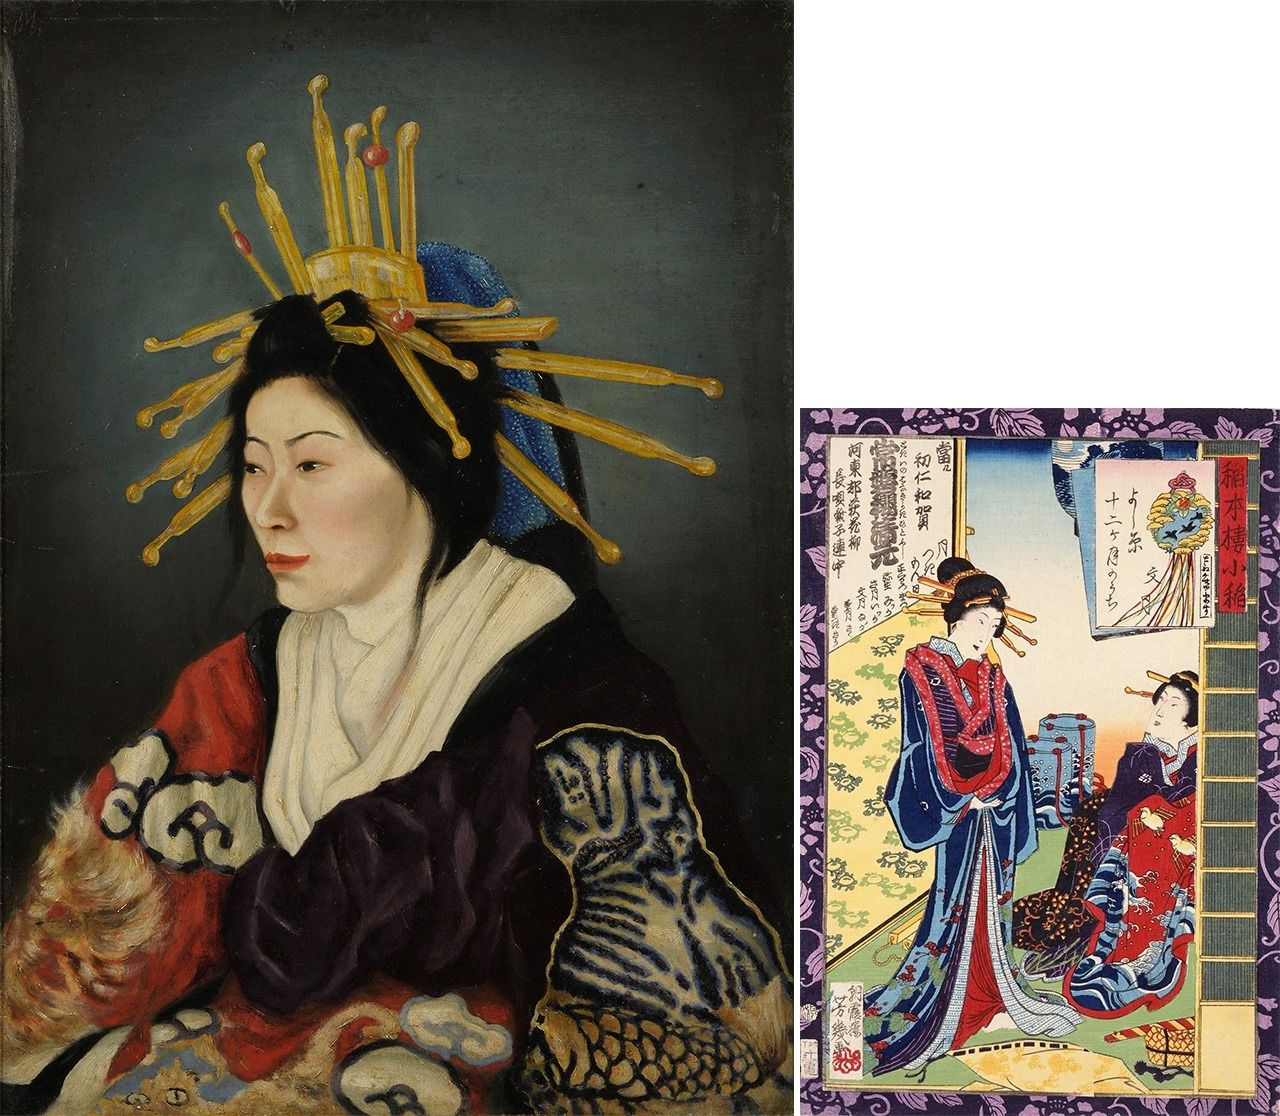 At left, Takahashi Yuichi, Oiran (Grand Courtesan), 1872, (Courtesy Tokyo University of the Arts); the ukiyo-e print on the right by Ochiai Yoshiiku is a depiction of the same woman, and dates from just three years earlier. (Courtesy Hagi Uragami Museum, Yamaguchi Prefecture)